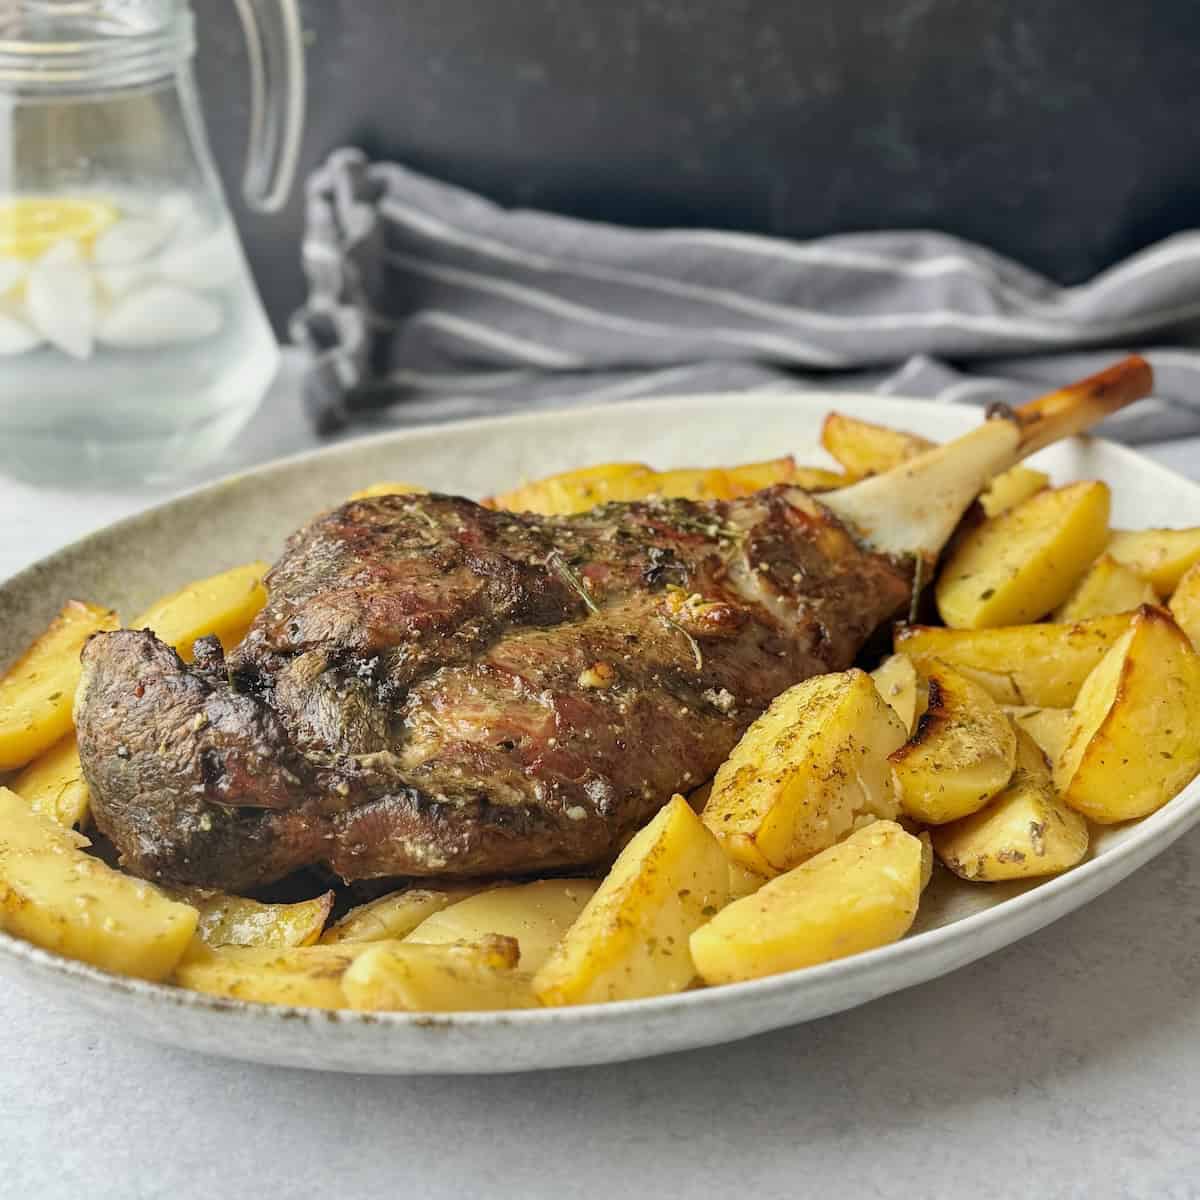 Roasted leg of lamb with potatoes around it in a white serving plate.